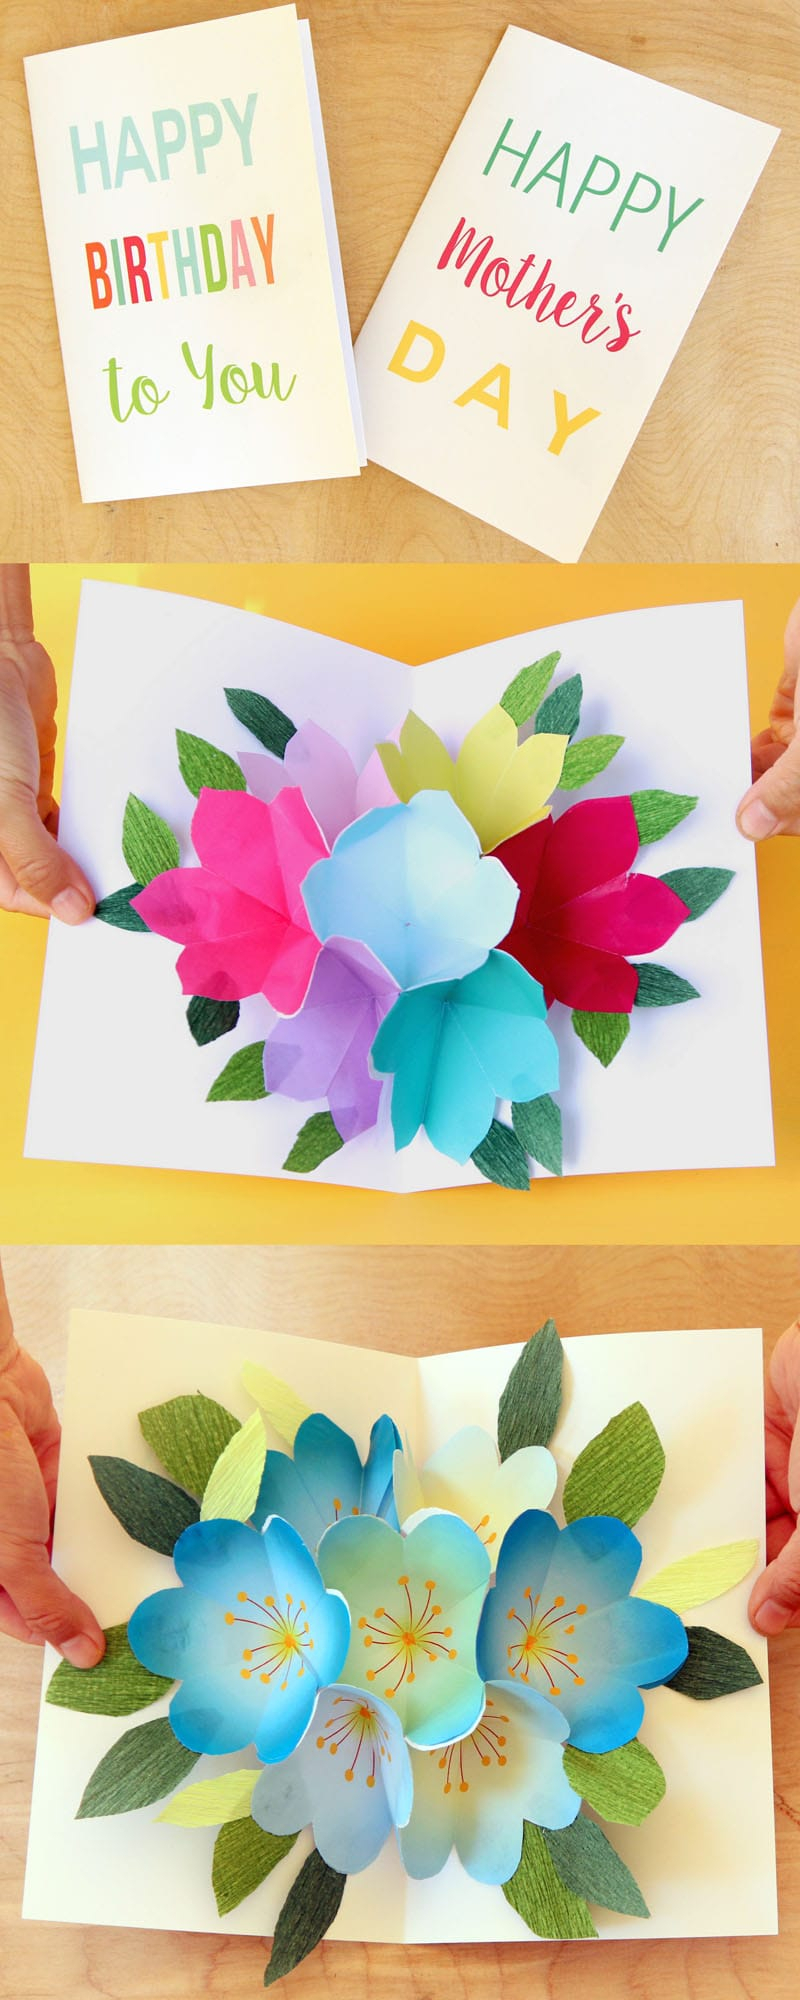 Birthday Card Craft Ideas Paper Craft Ideas For Greeting Cards Free Printable Happy Birthday